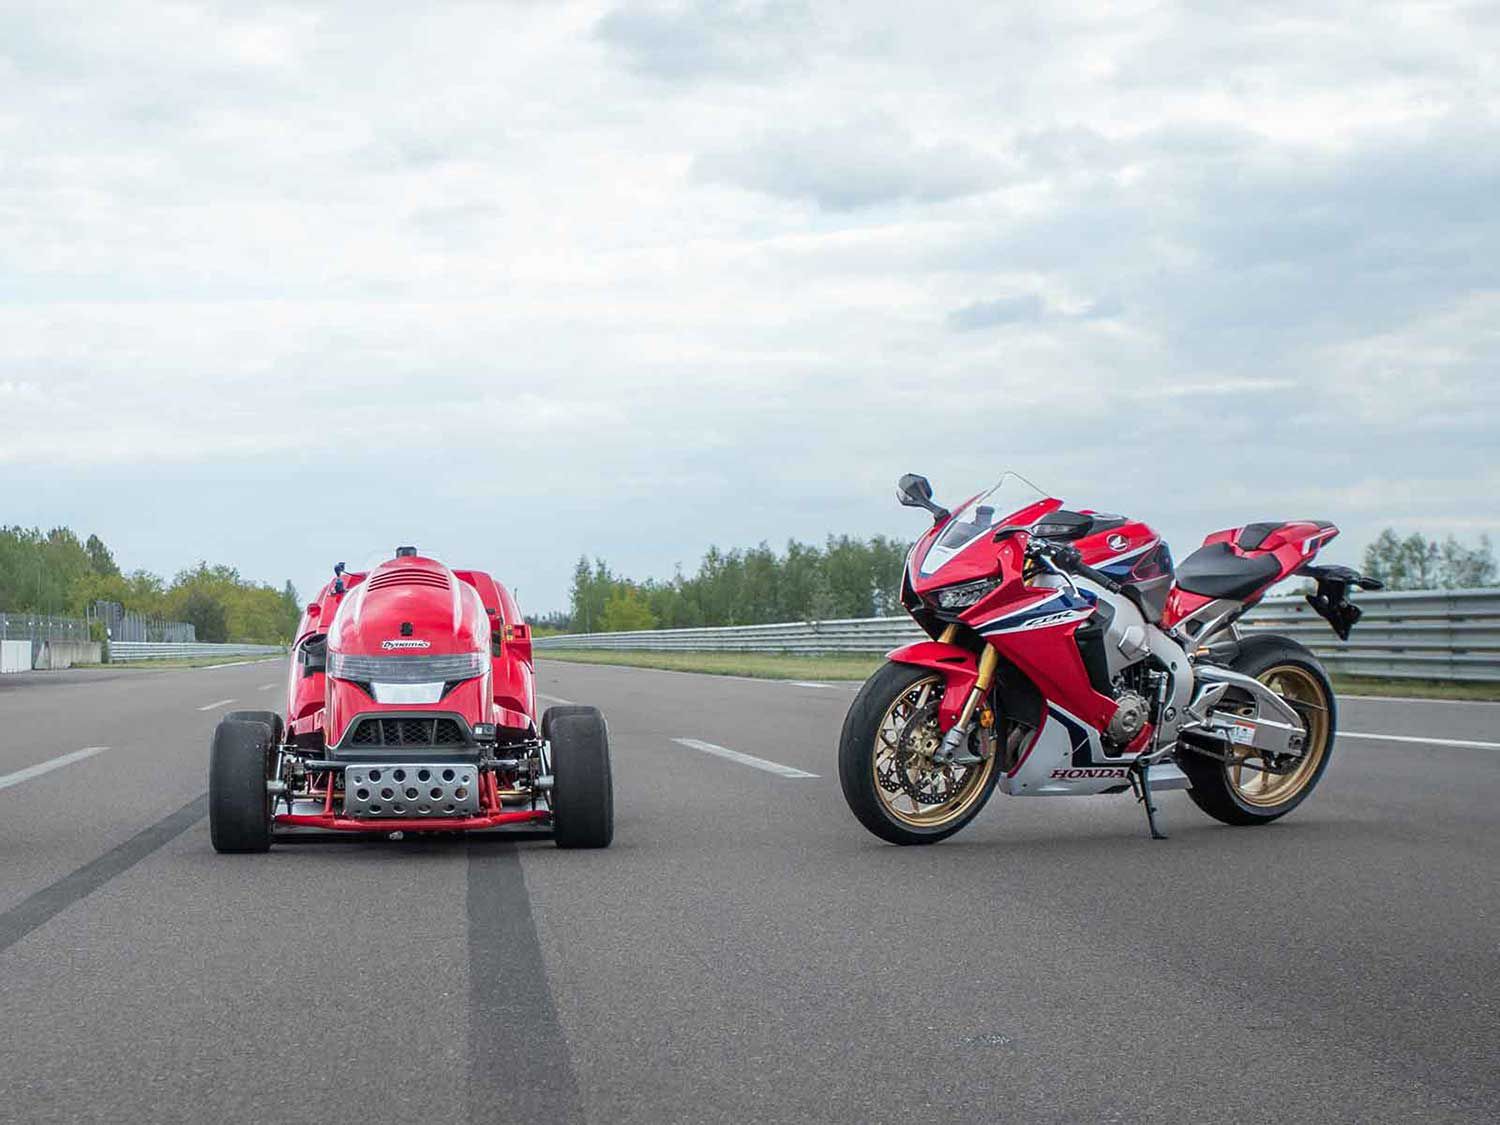 Honda S Mean Riding Lawn Mower Sets New World Record Motorcyclist